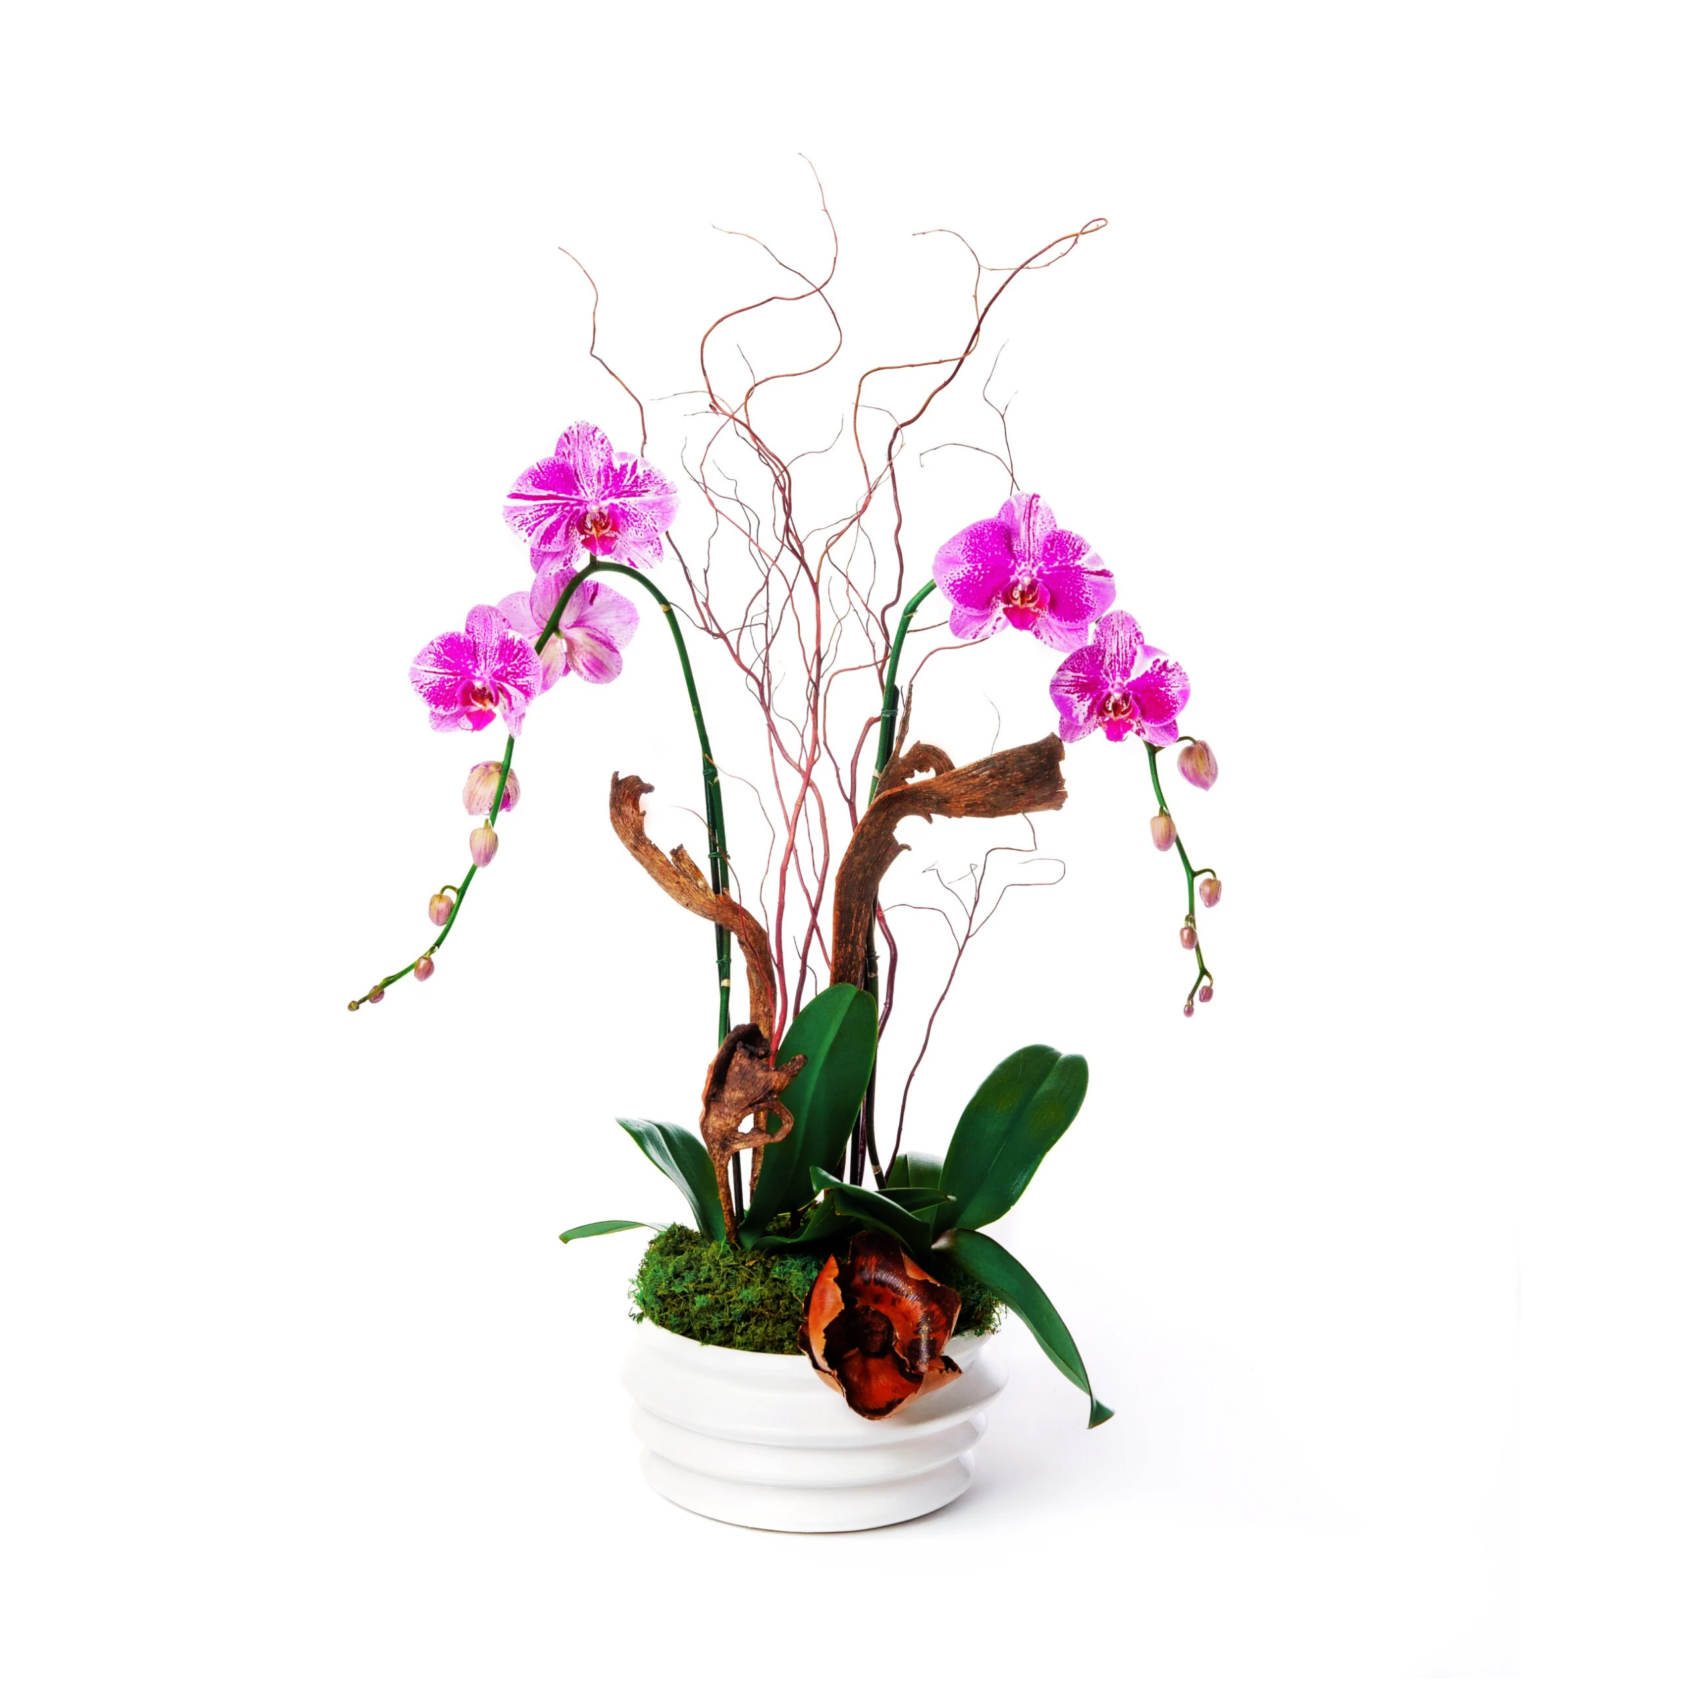 apgrodite 1 scaled Aphrodite: Elegant Blooming Orchids in a Ceramic Pot